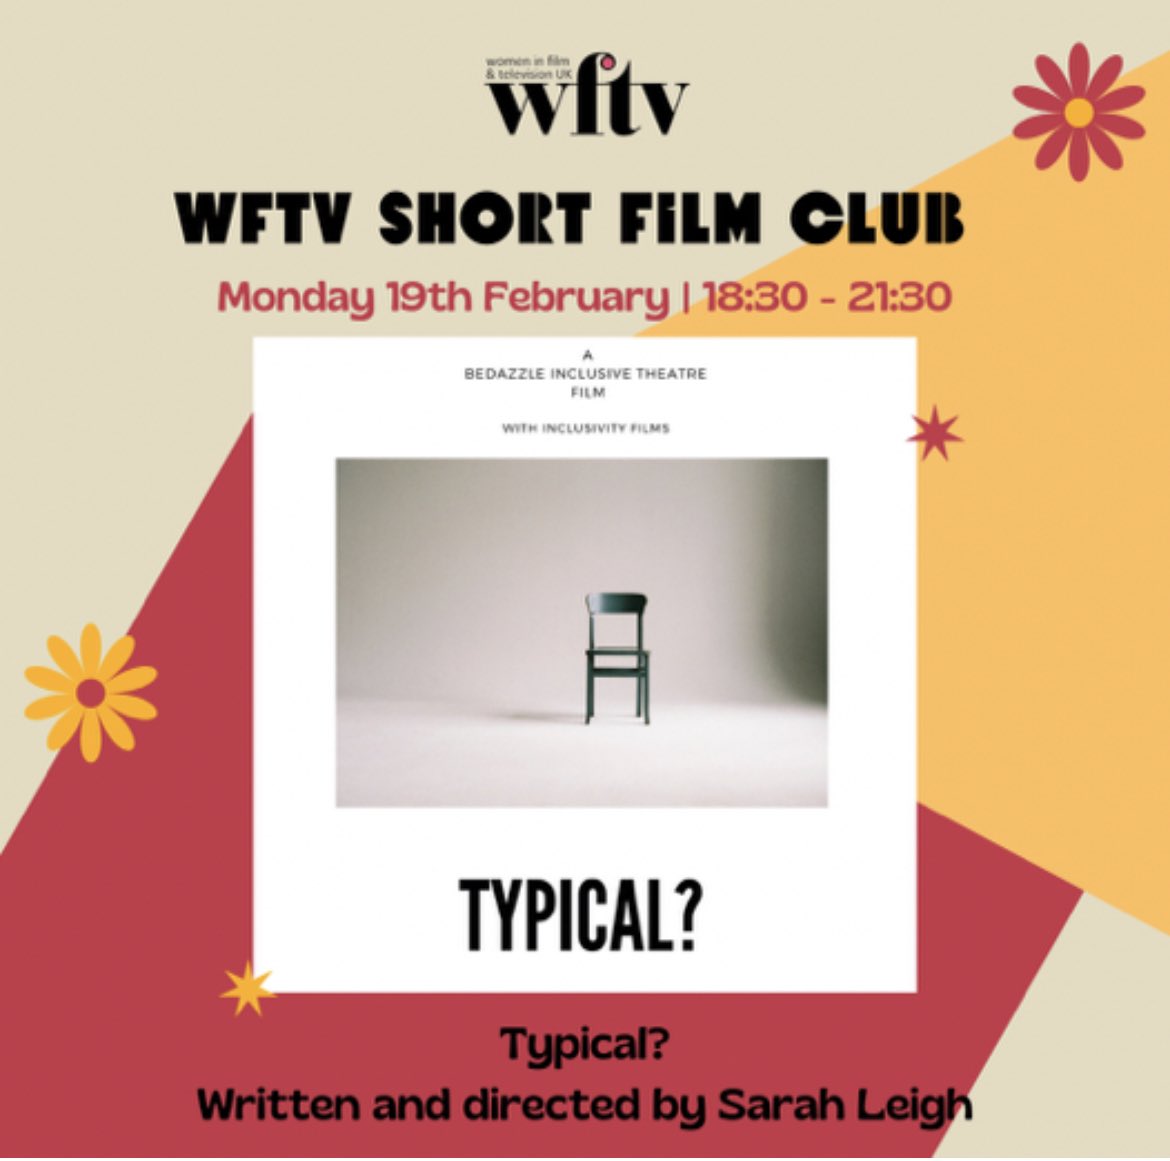 TYPICAL? is screening @WFTV_UK Short Film Club on Monday 19th February. Thanks WFTV for selecting our film! 

#ShortFilmClub #WFTV #WomenInFilm #Filmmakers #FemaleFilmmakers #DisabilityRights #DisabledTalent #NothingAboutUsWithoutUs #SocialImpact 

#ImageDescription in 🧵